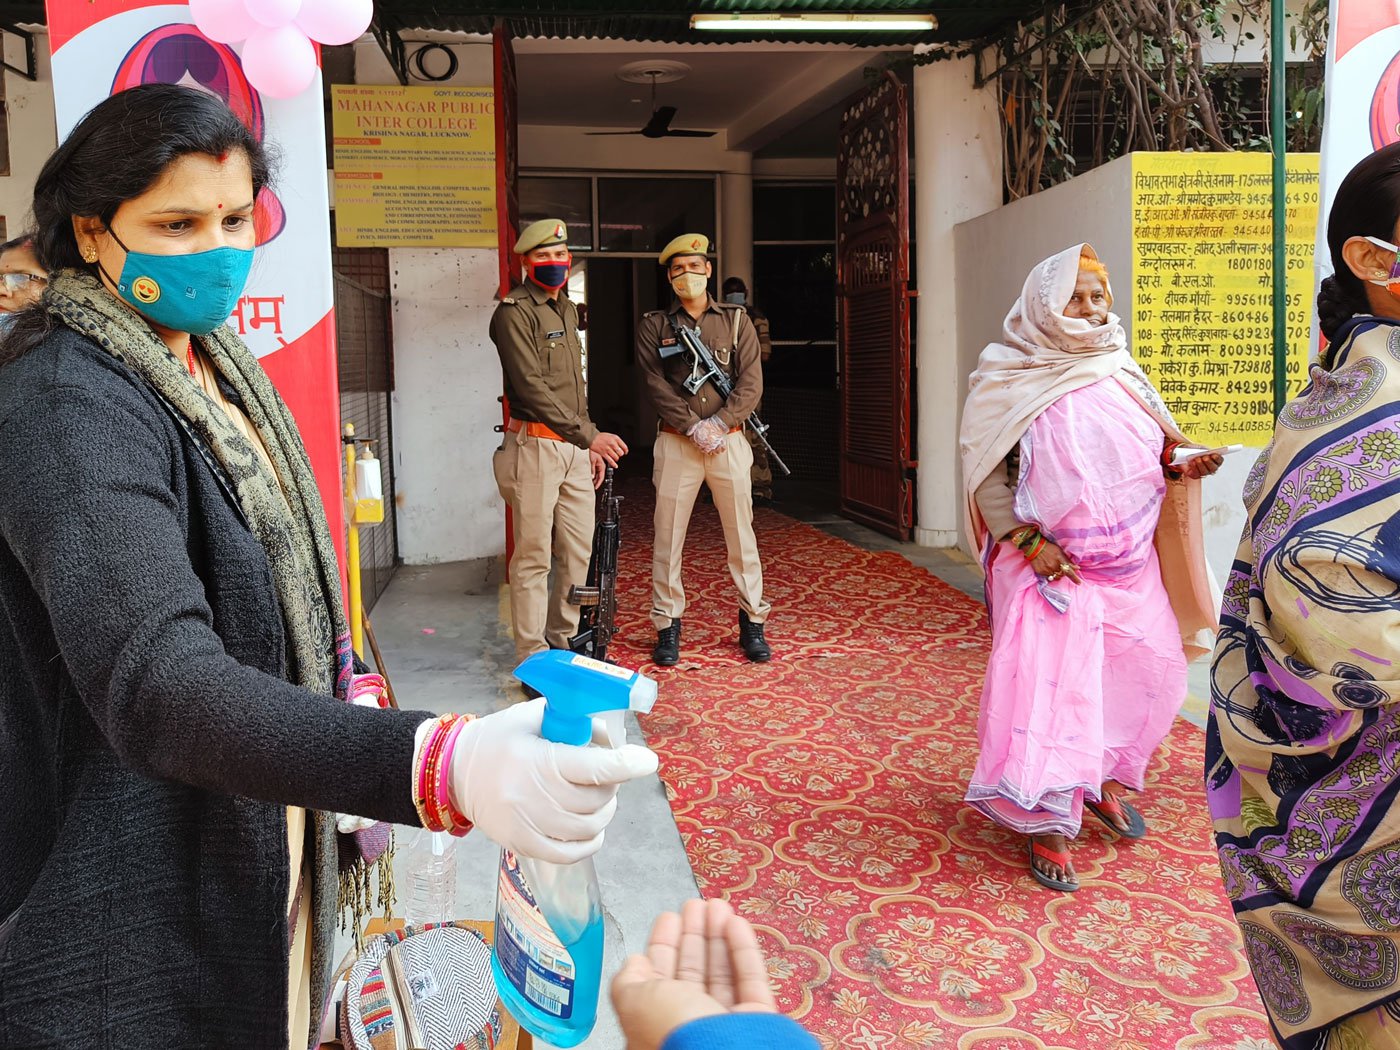 Reeta Bajpai spraying sanitiser on a voter's hands while on duty in Lucknow Cantonment assembly constituency on February 23